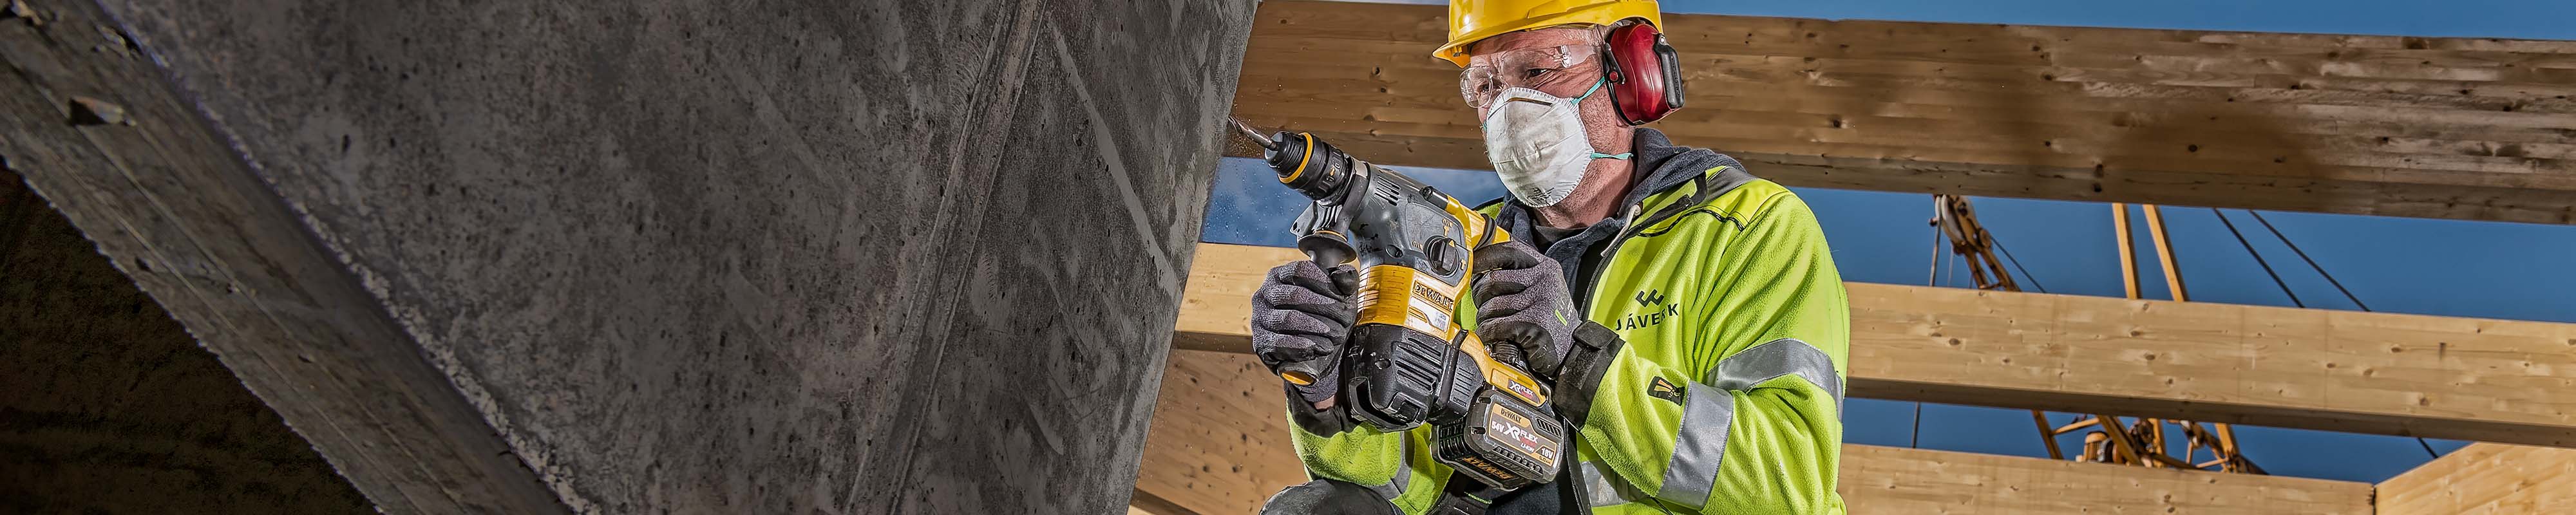 Construction worker using a drill on a site